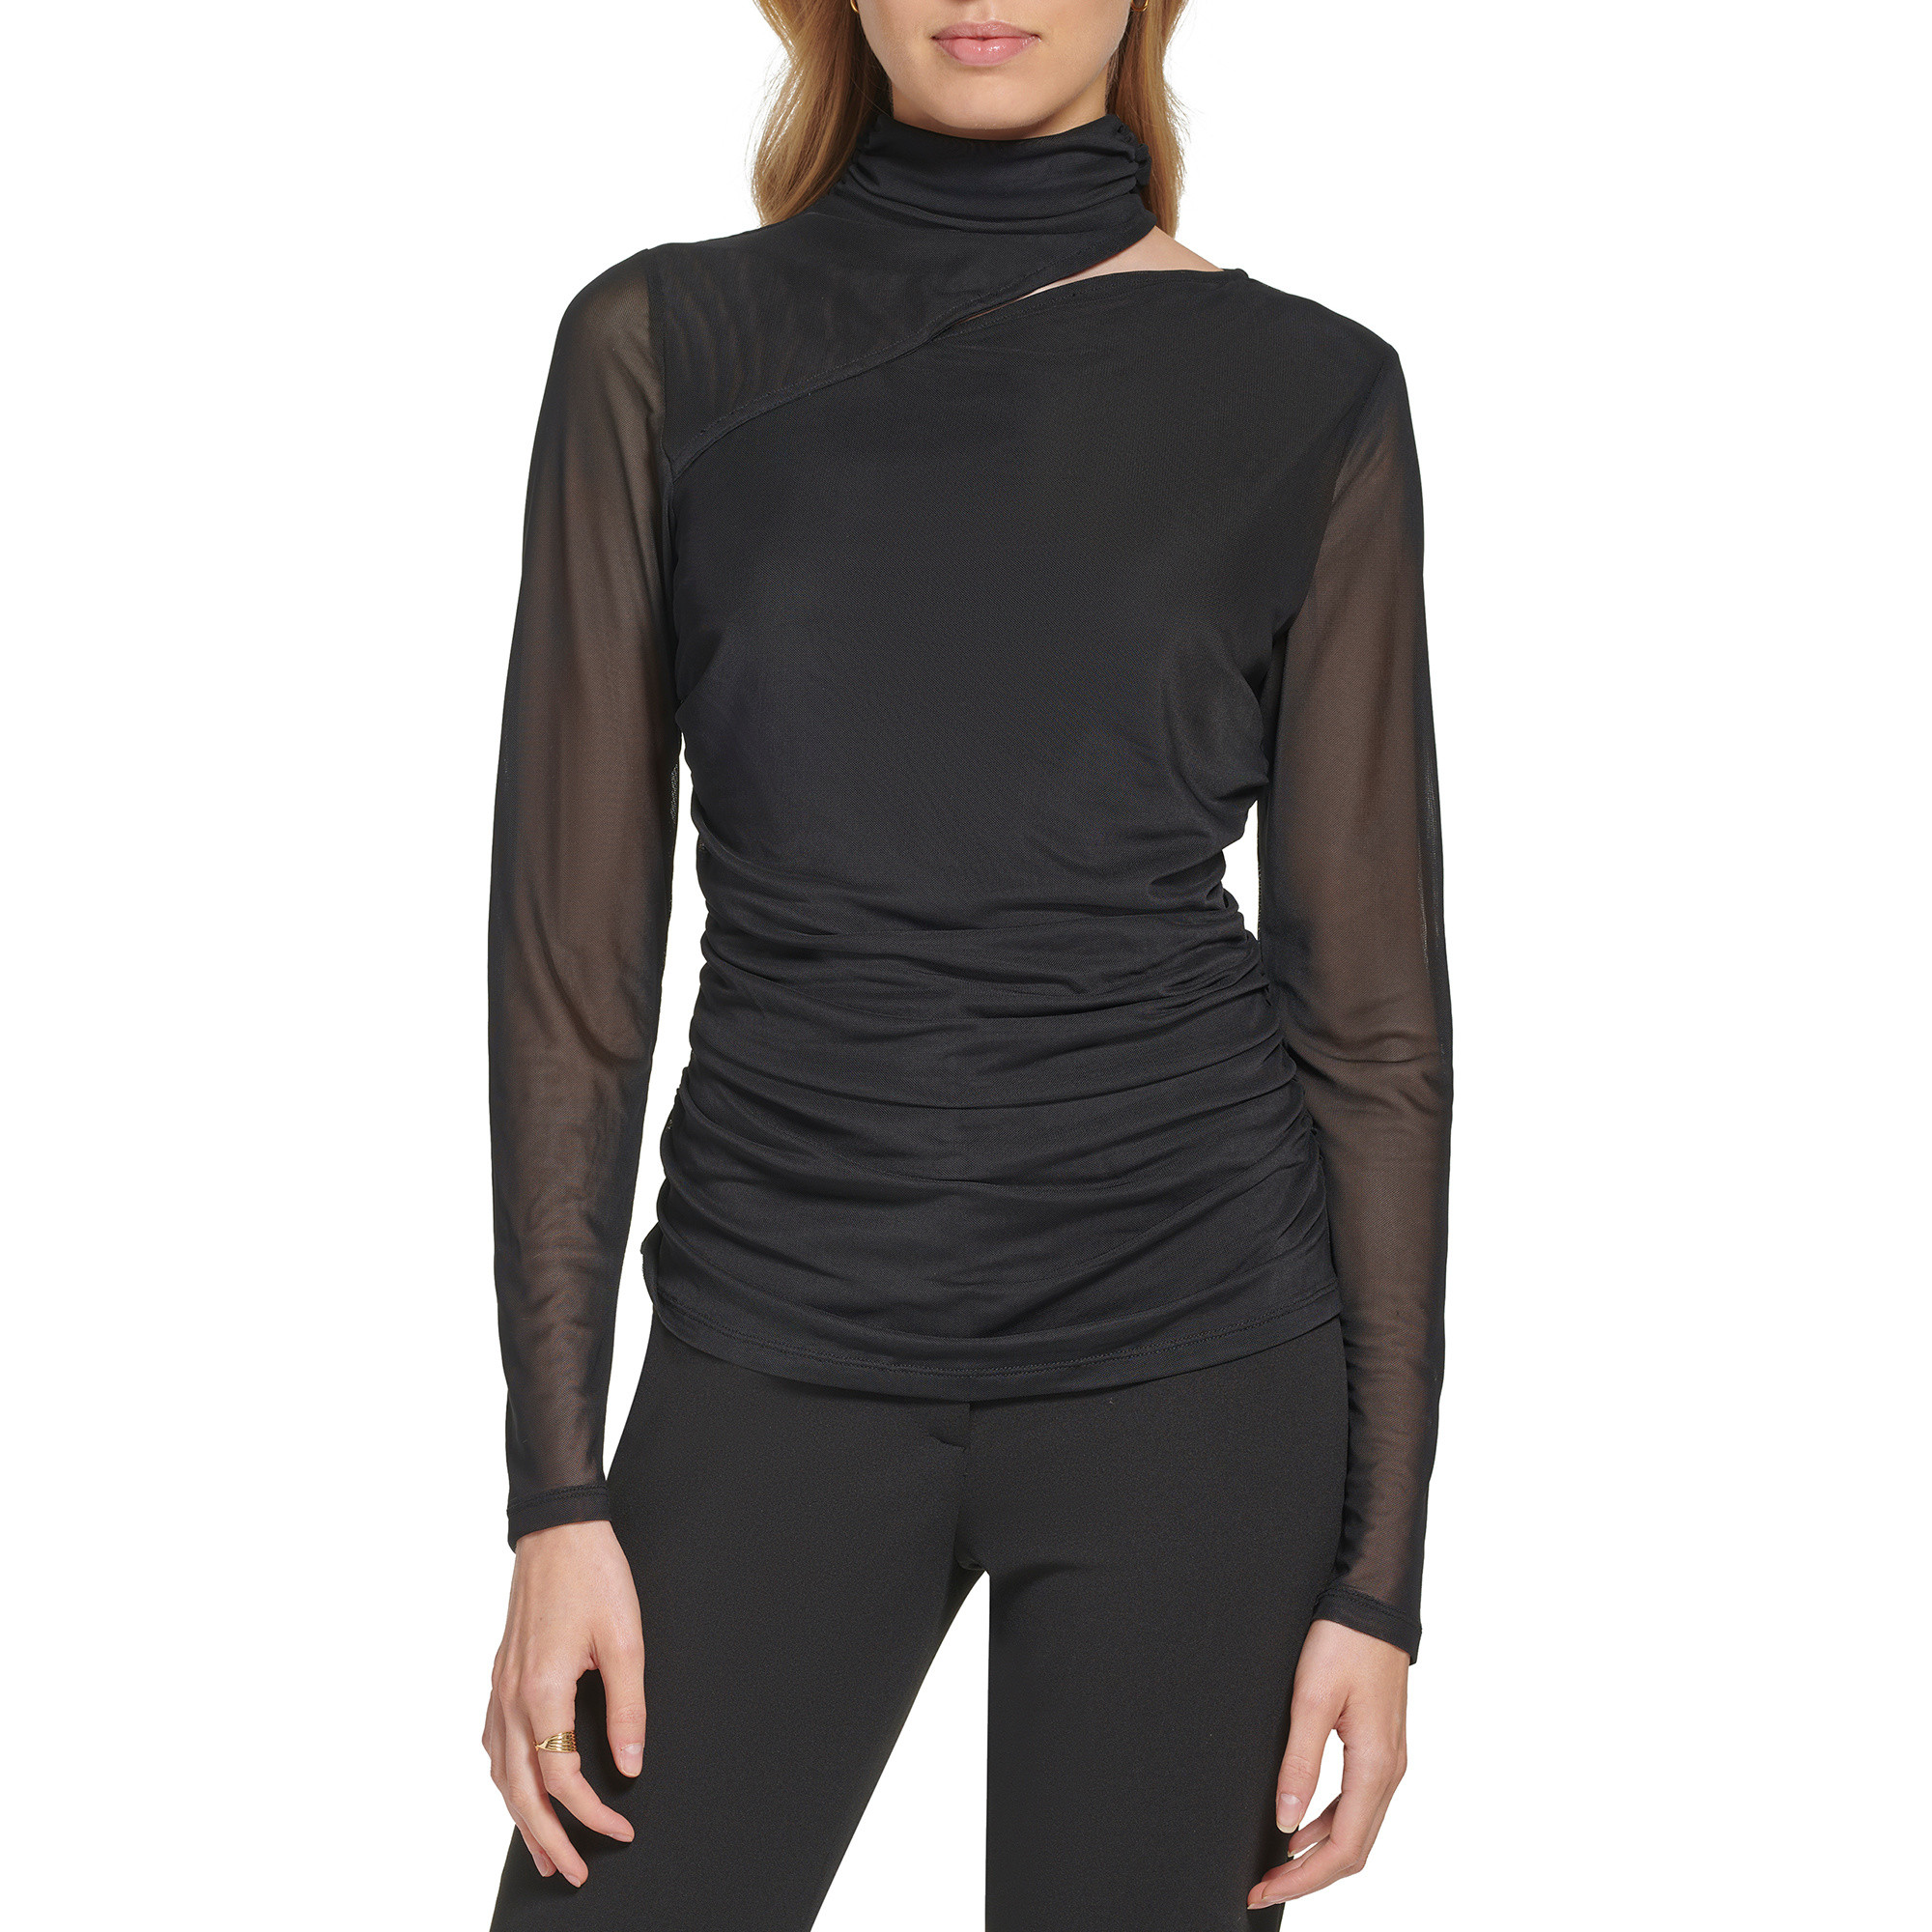 DKNY - Mesh sweater with cut out detail, Black, large image number 2